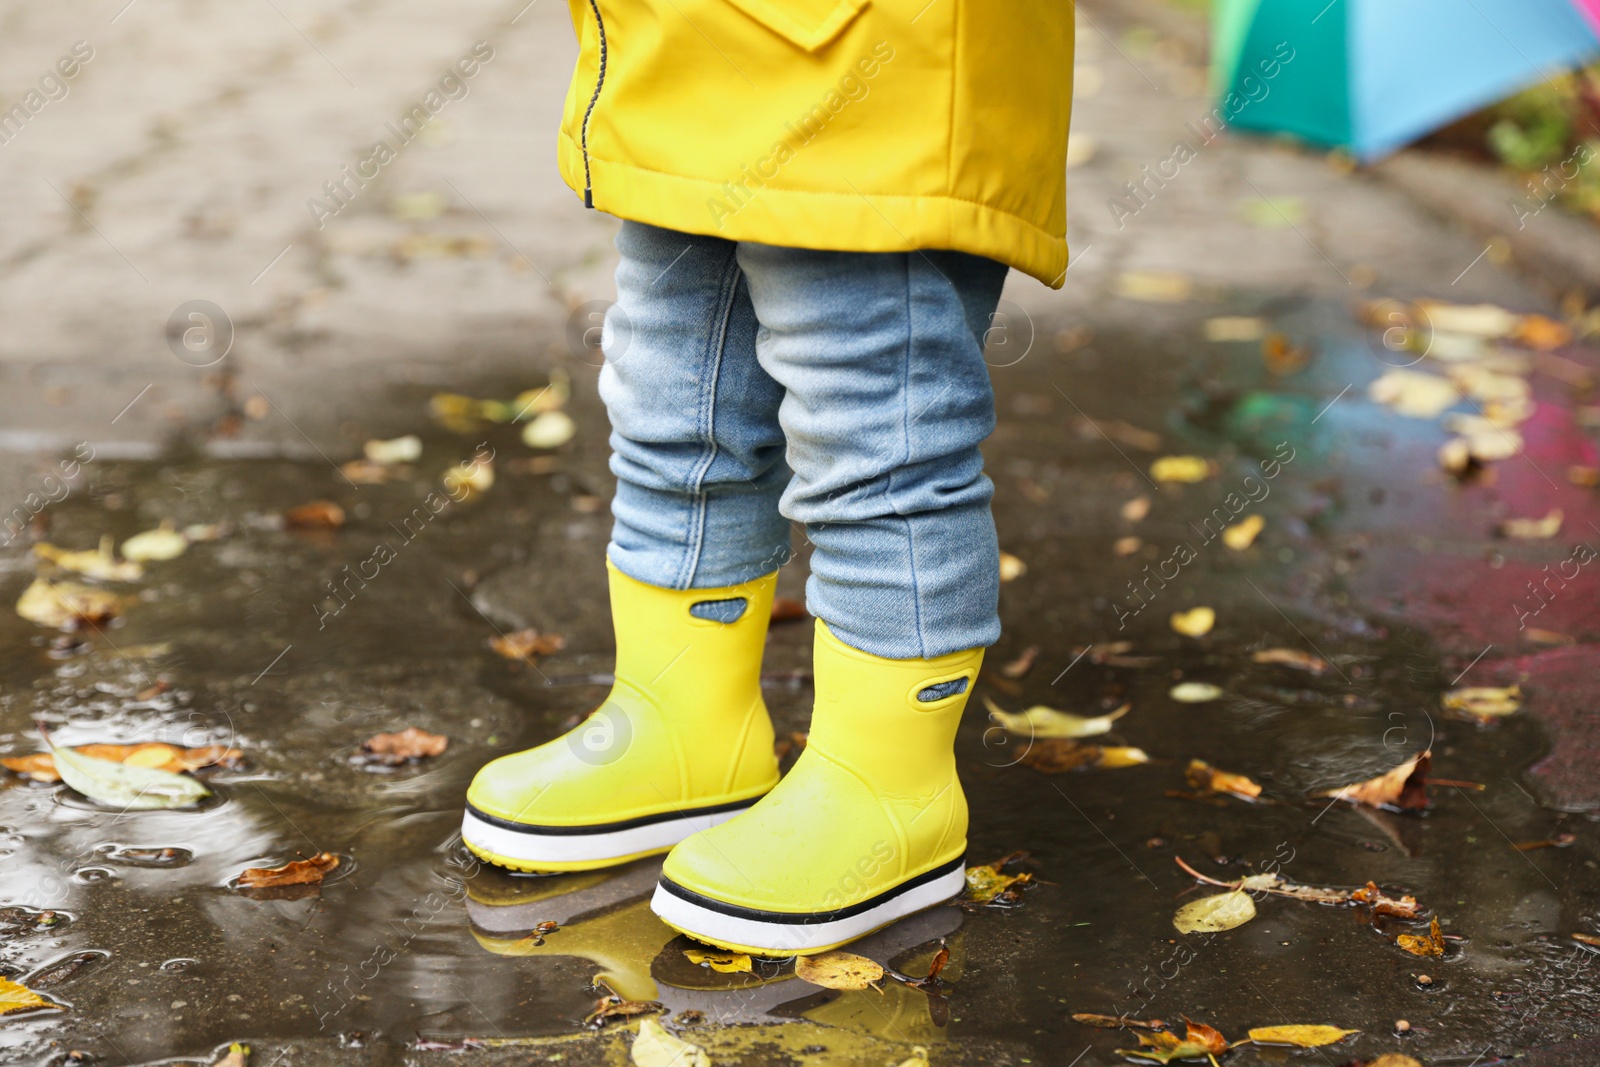 Photo of Little girl standing in puddle outdoors, closeup